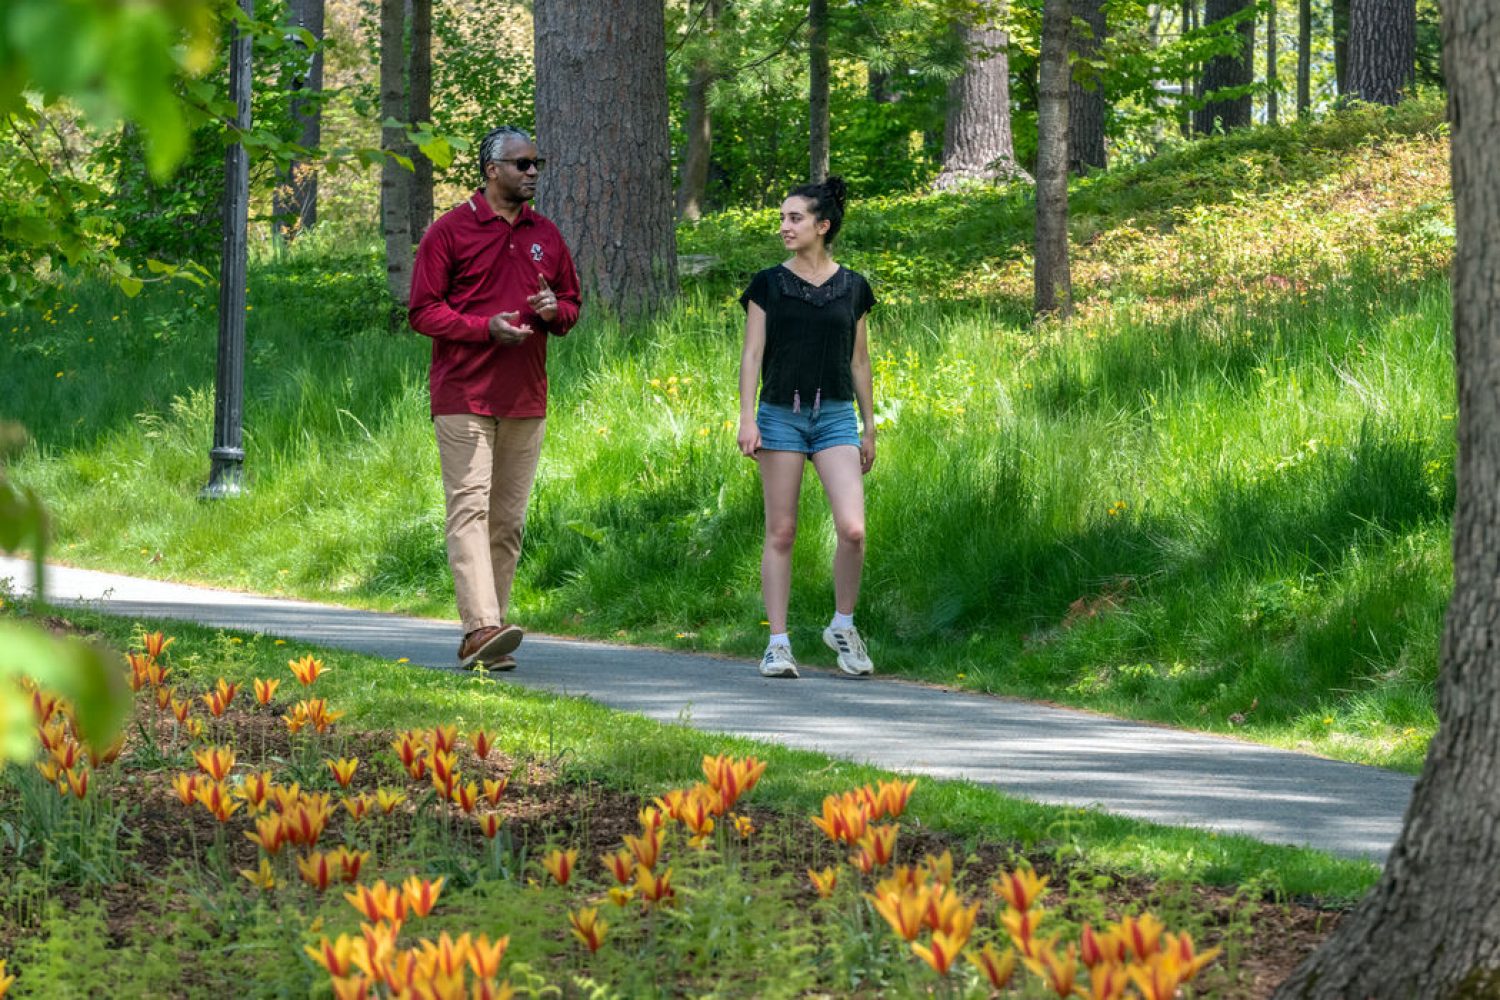 two people walking in a park